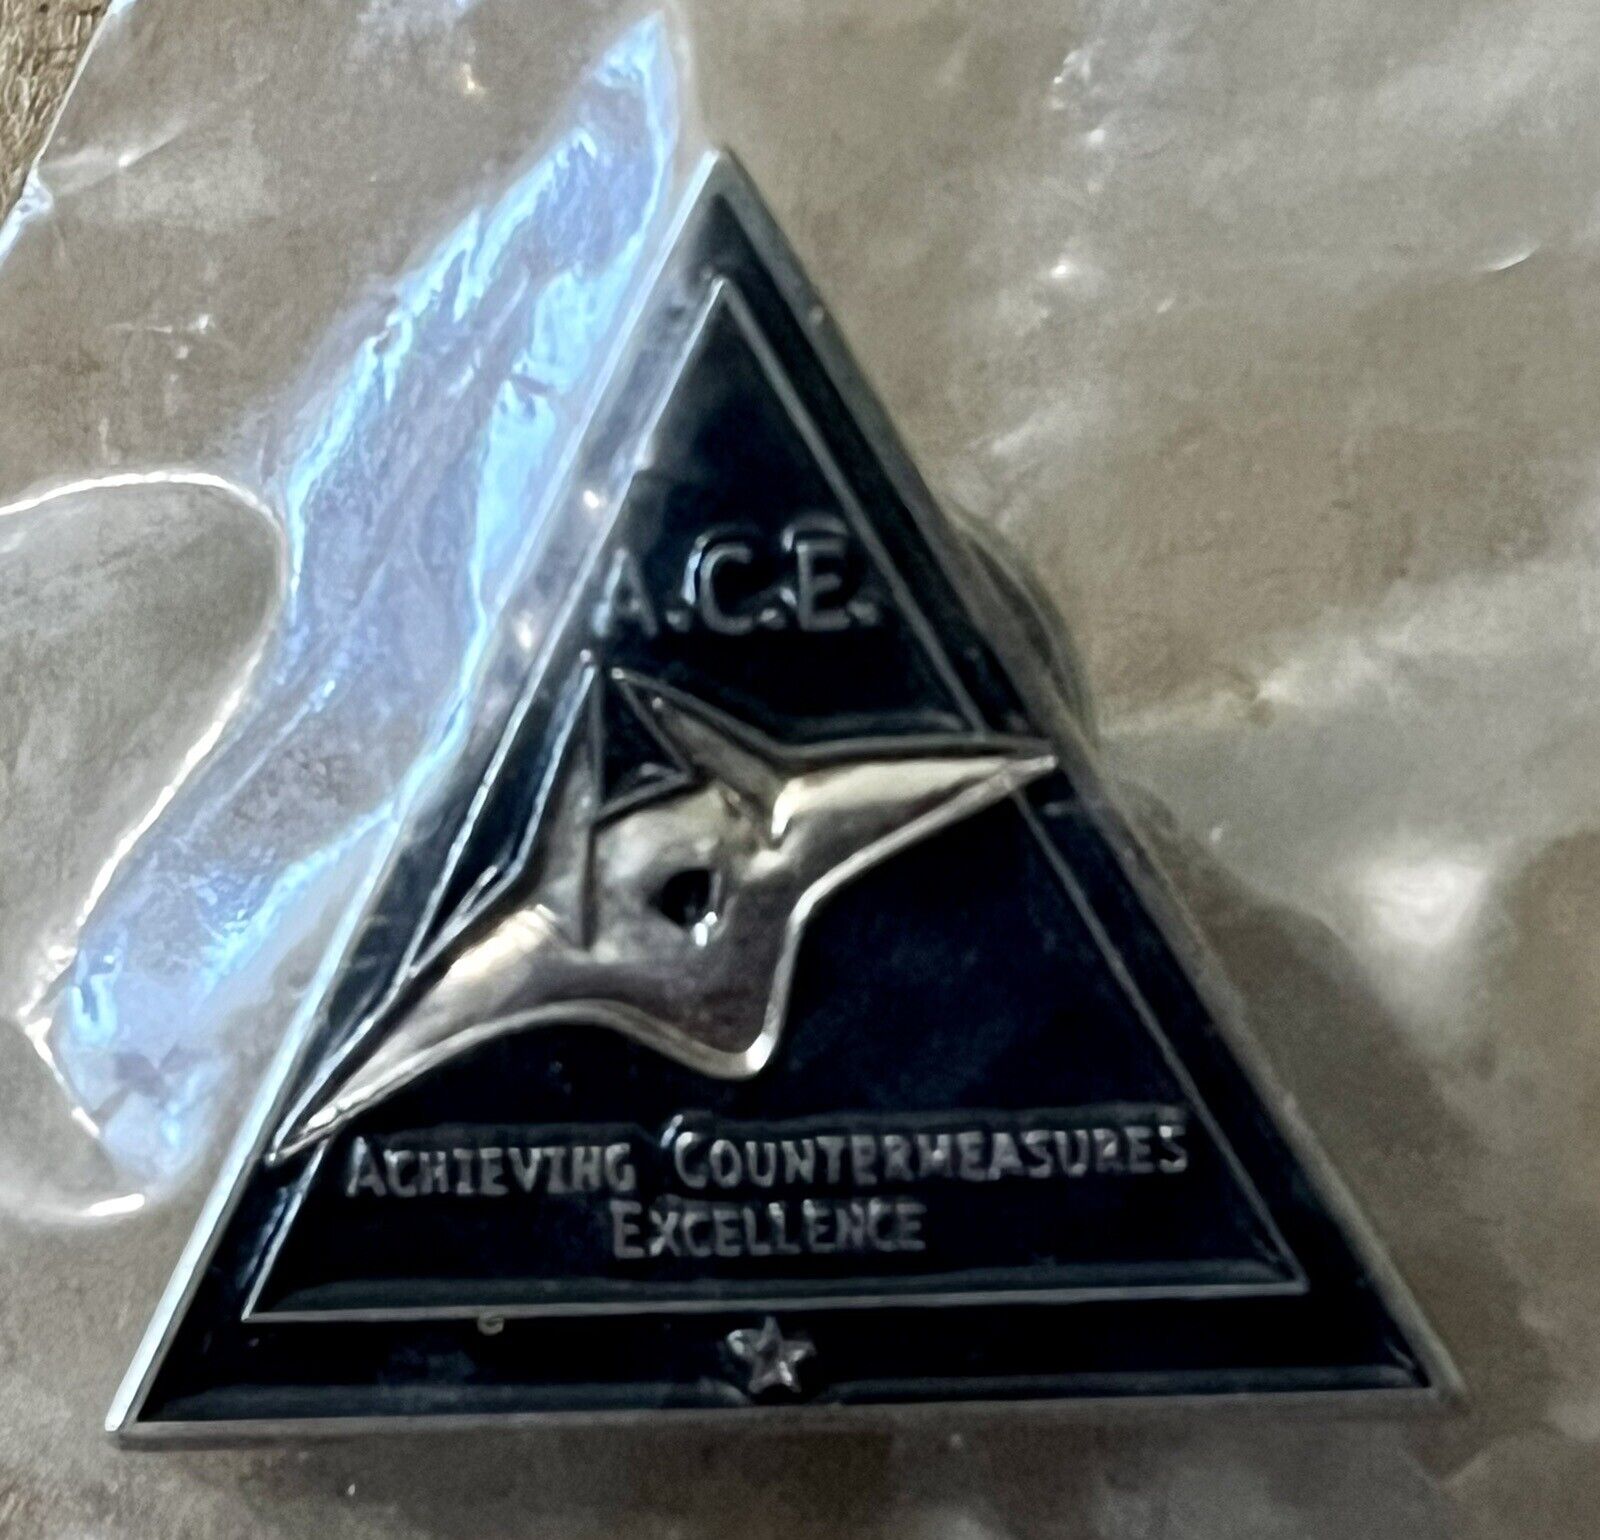 BAE Systems A.C.E. Achieving Countermeasures Excellence Lapel Hat Pin